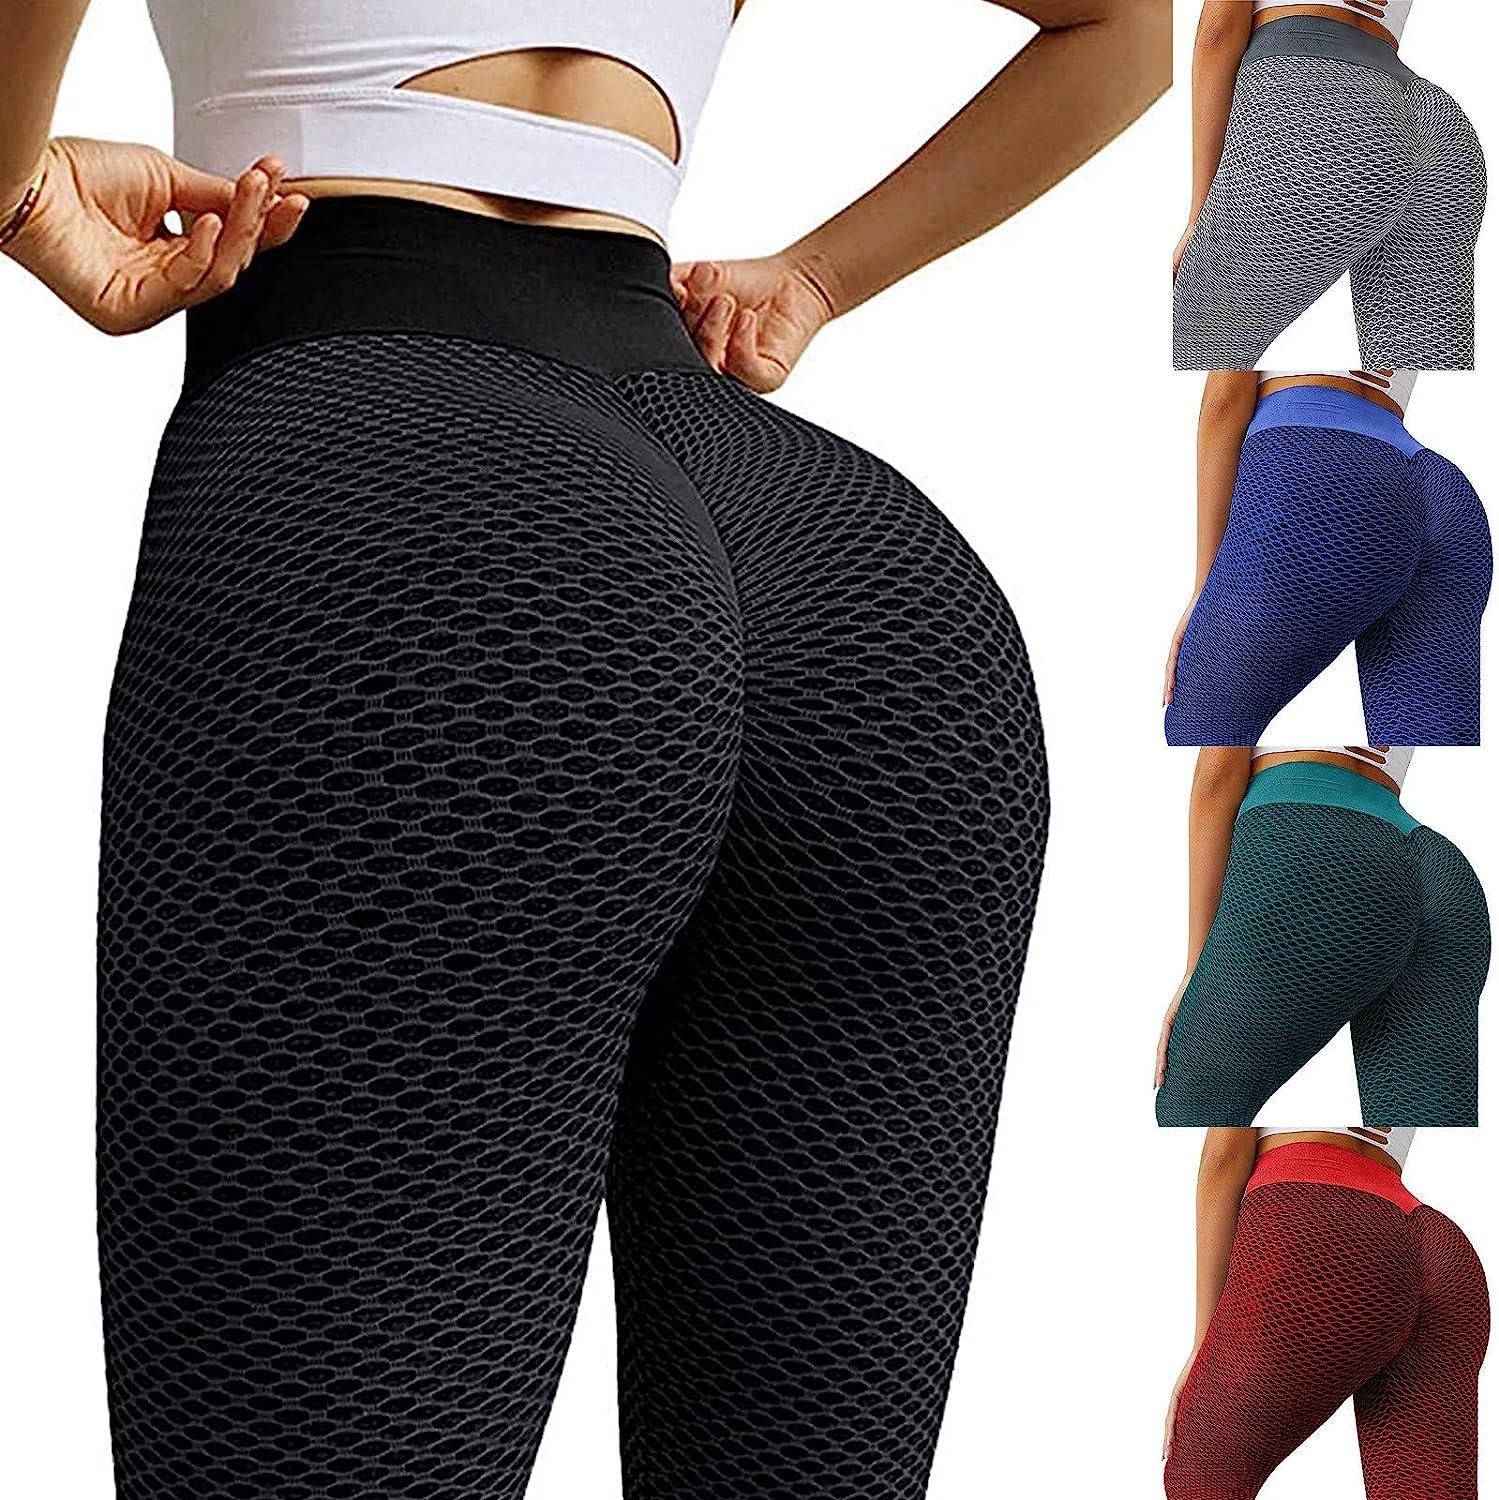 Women's Loose High Waist Wide Leg Pants Workout Out Leggings Casual Trousers  Yoga Gym Pants,Red,XXL 